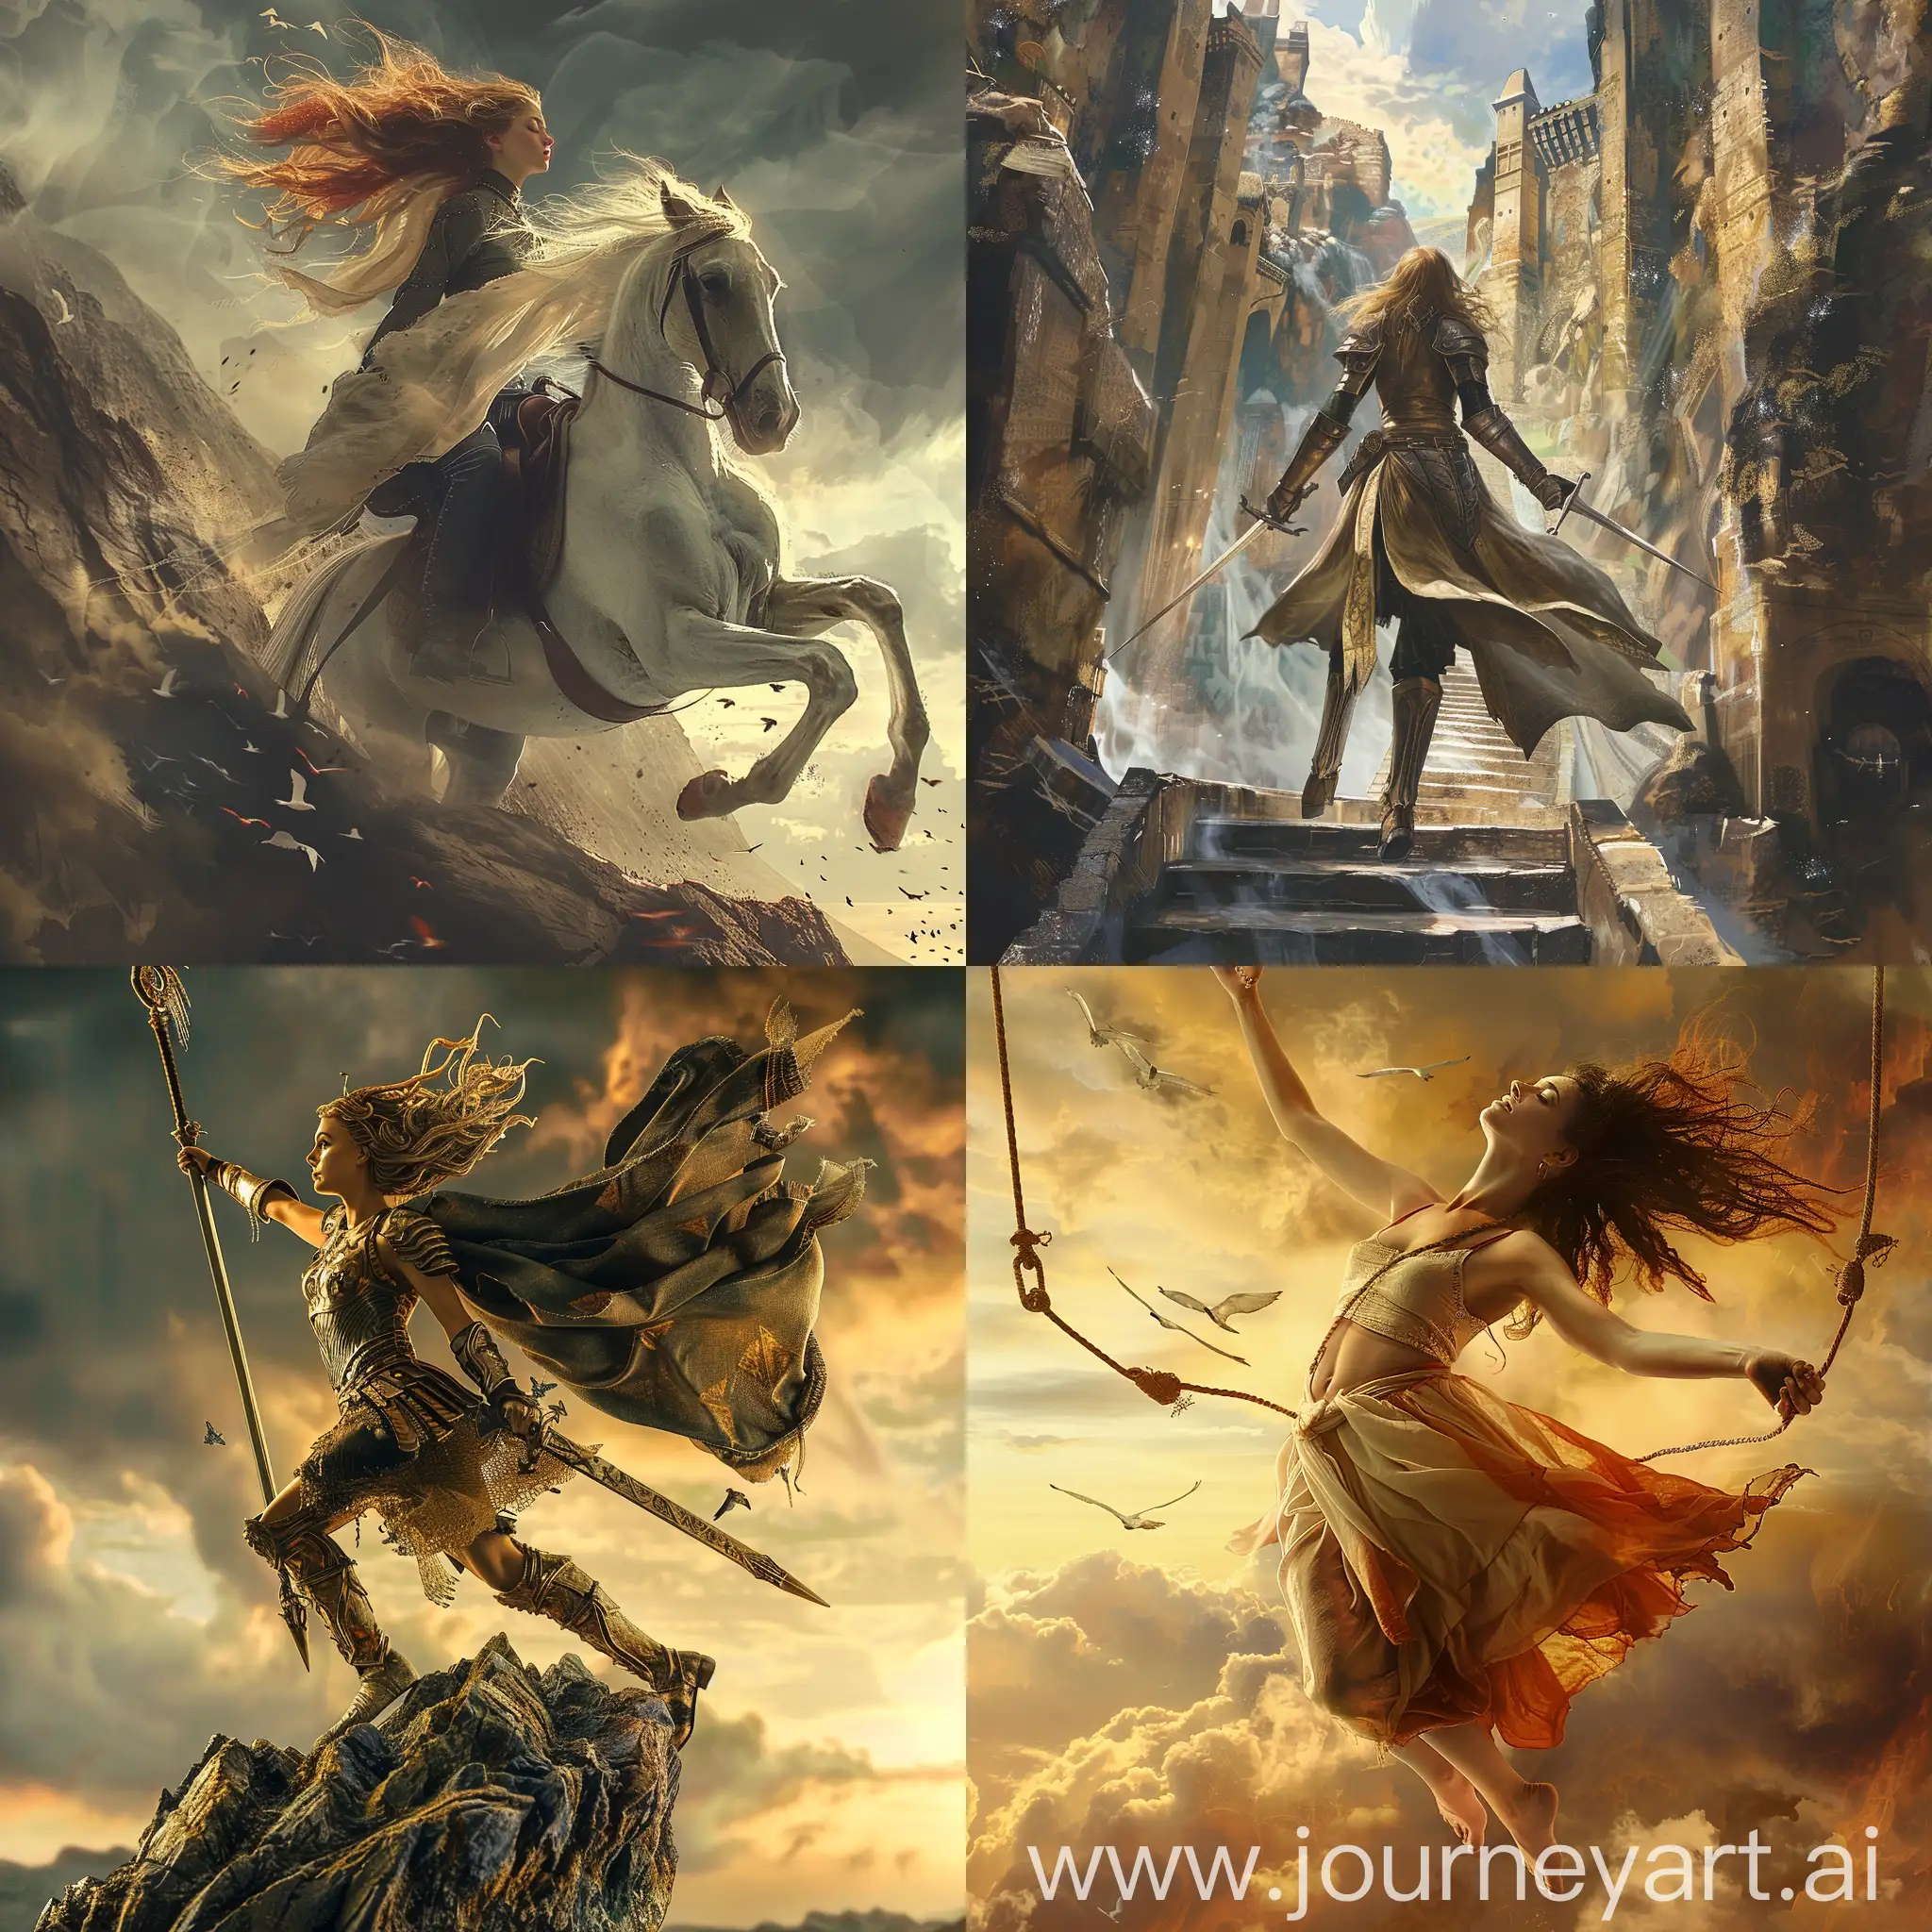 Realistic, fantasy style. Theme: freedom, courage. Graphics that motivate action